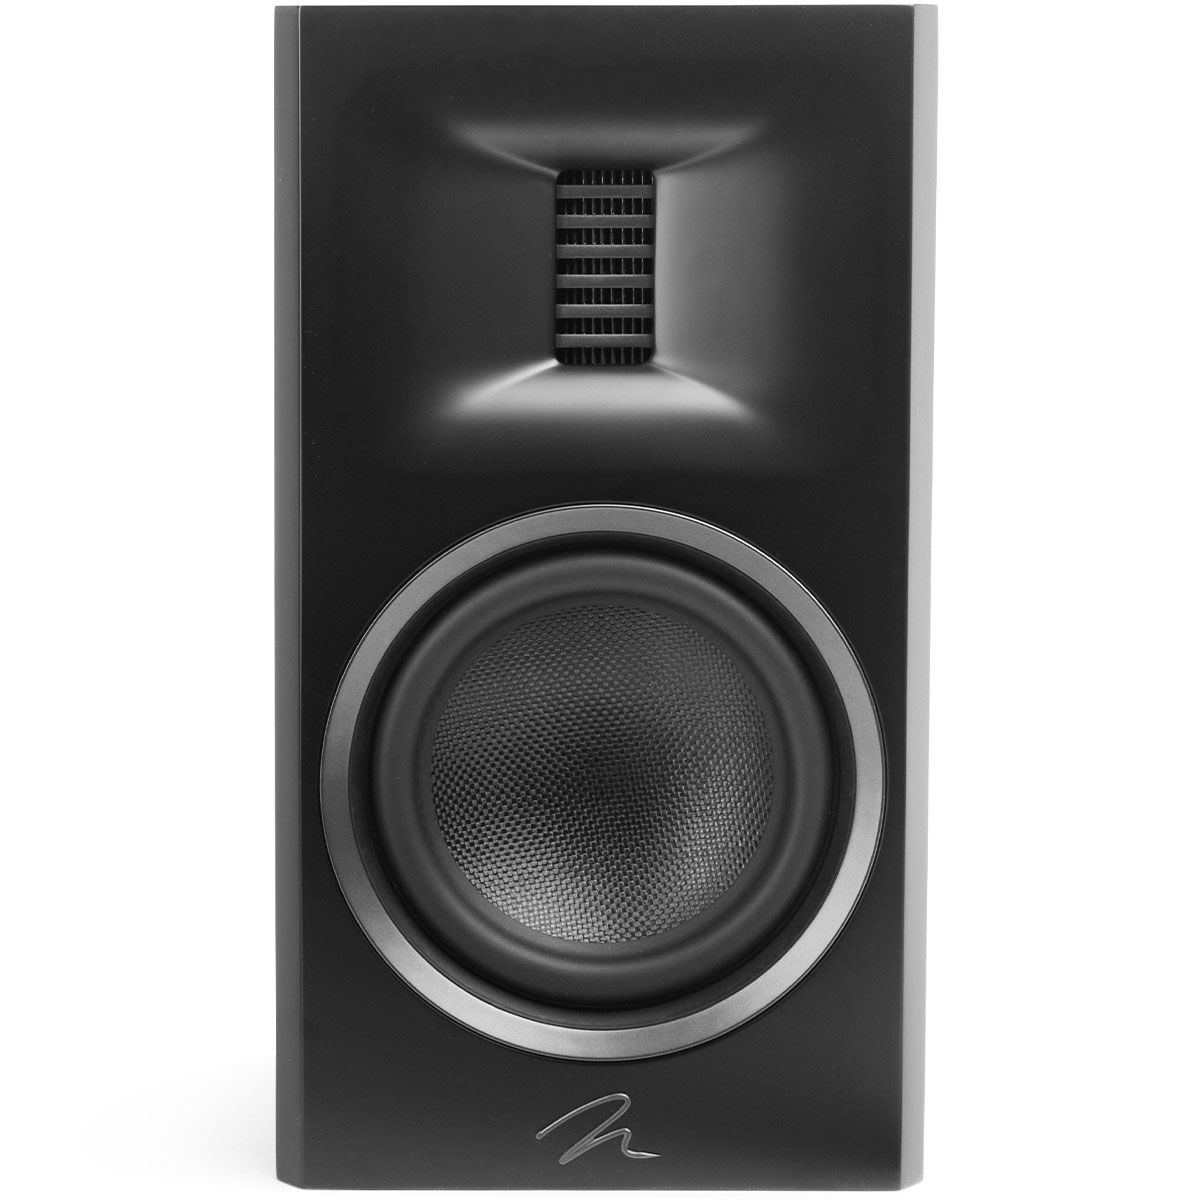 MartinLogan Motion XT B100 Bookshelf Speaker in black, front view without grilles on white background